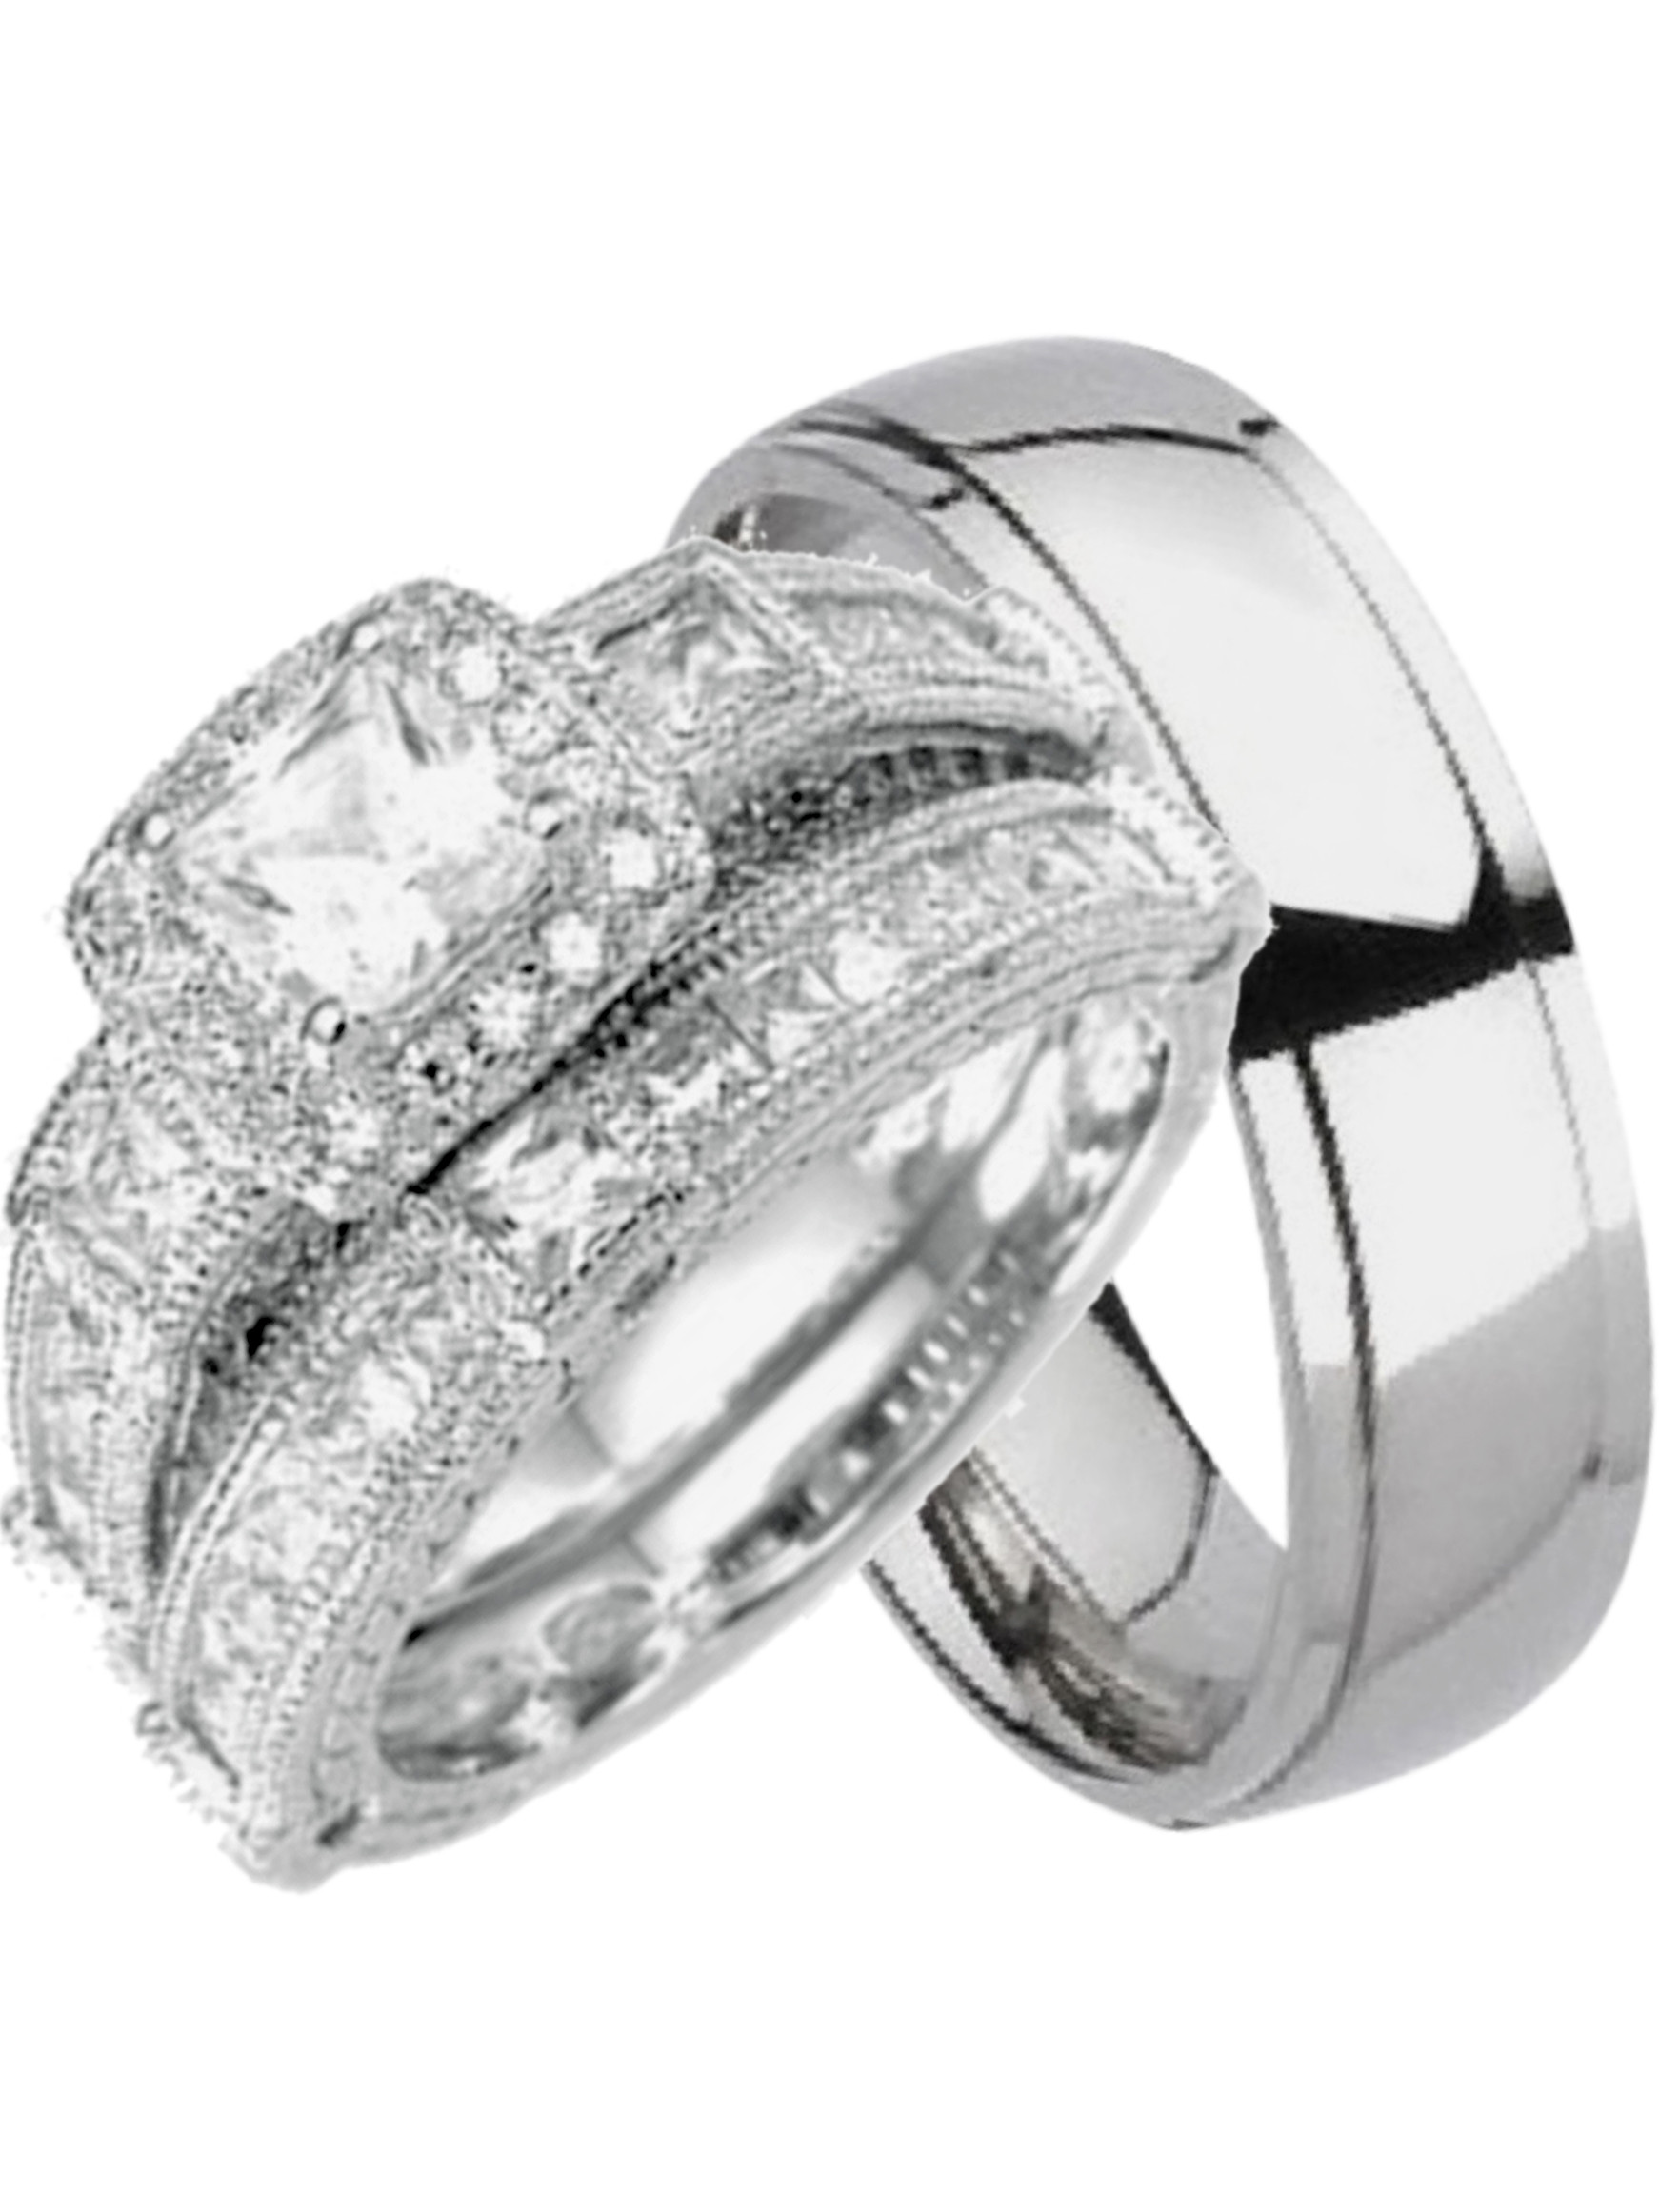 Wedding Rings For Him And Her Matching
 LaRaso & Co His and Hers Wedding Sets Silver Titanium 3